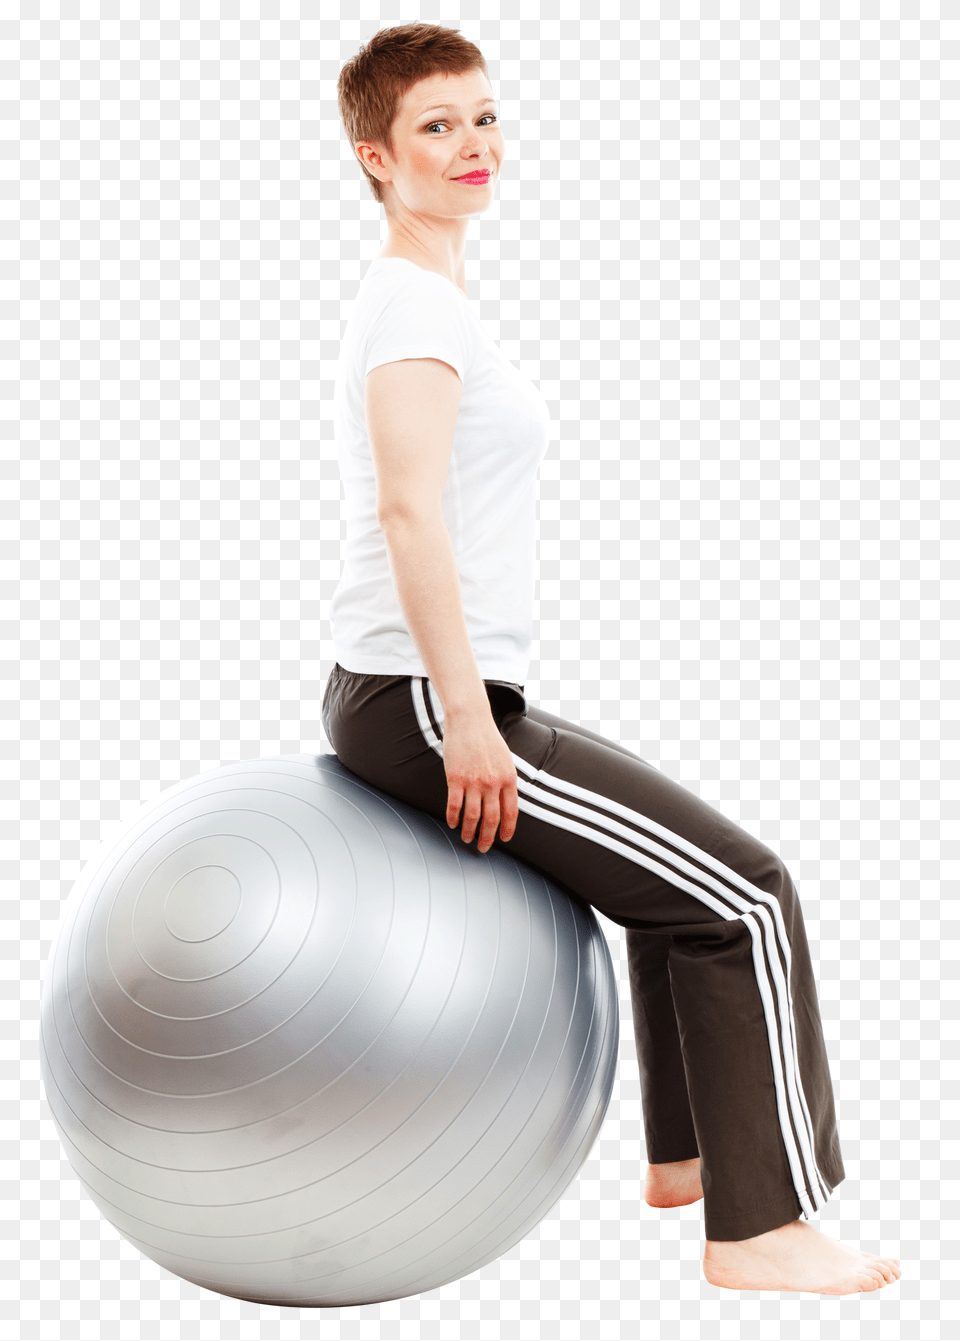 Pngpix Com Beautiful Girl Doing Exercises With Ball Image, Sphere, Person, Sitting, Clothing Free Png